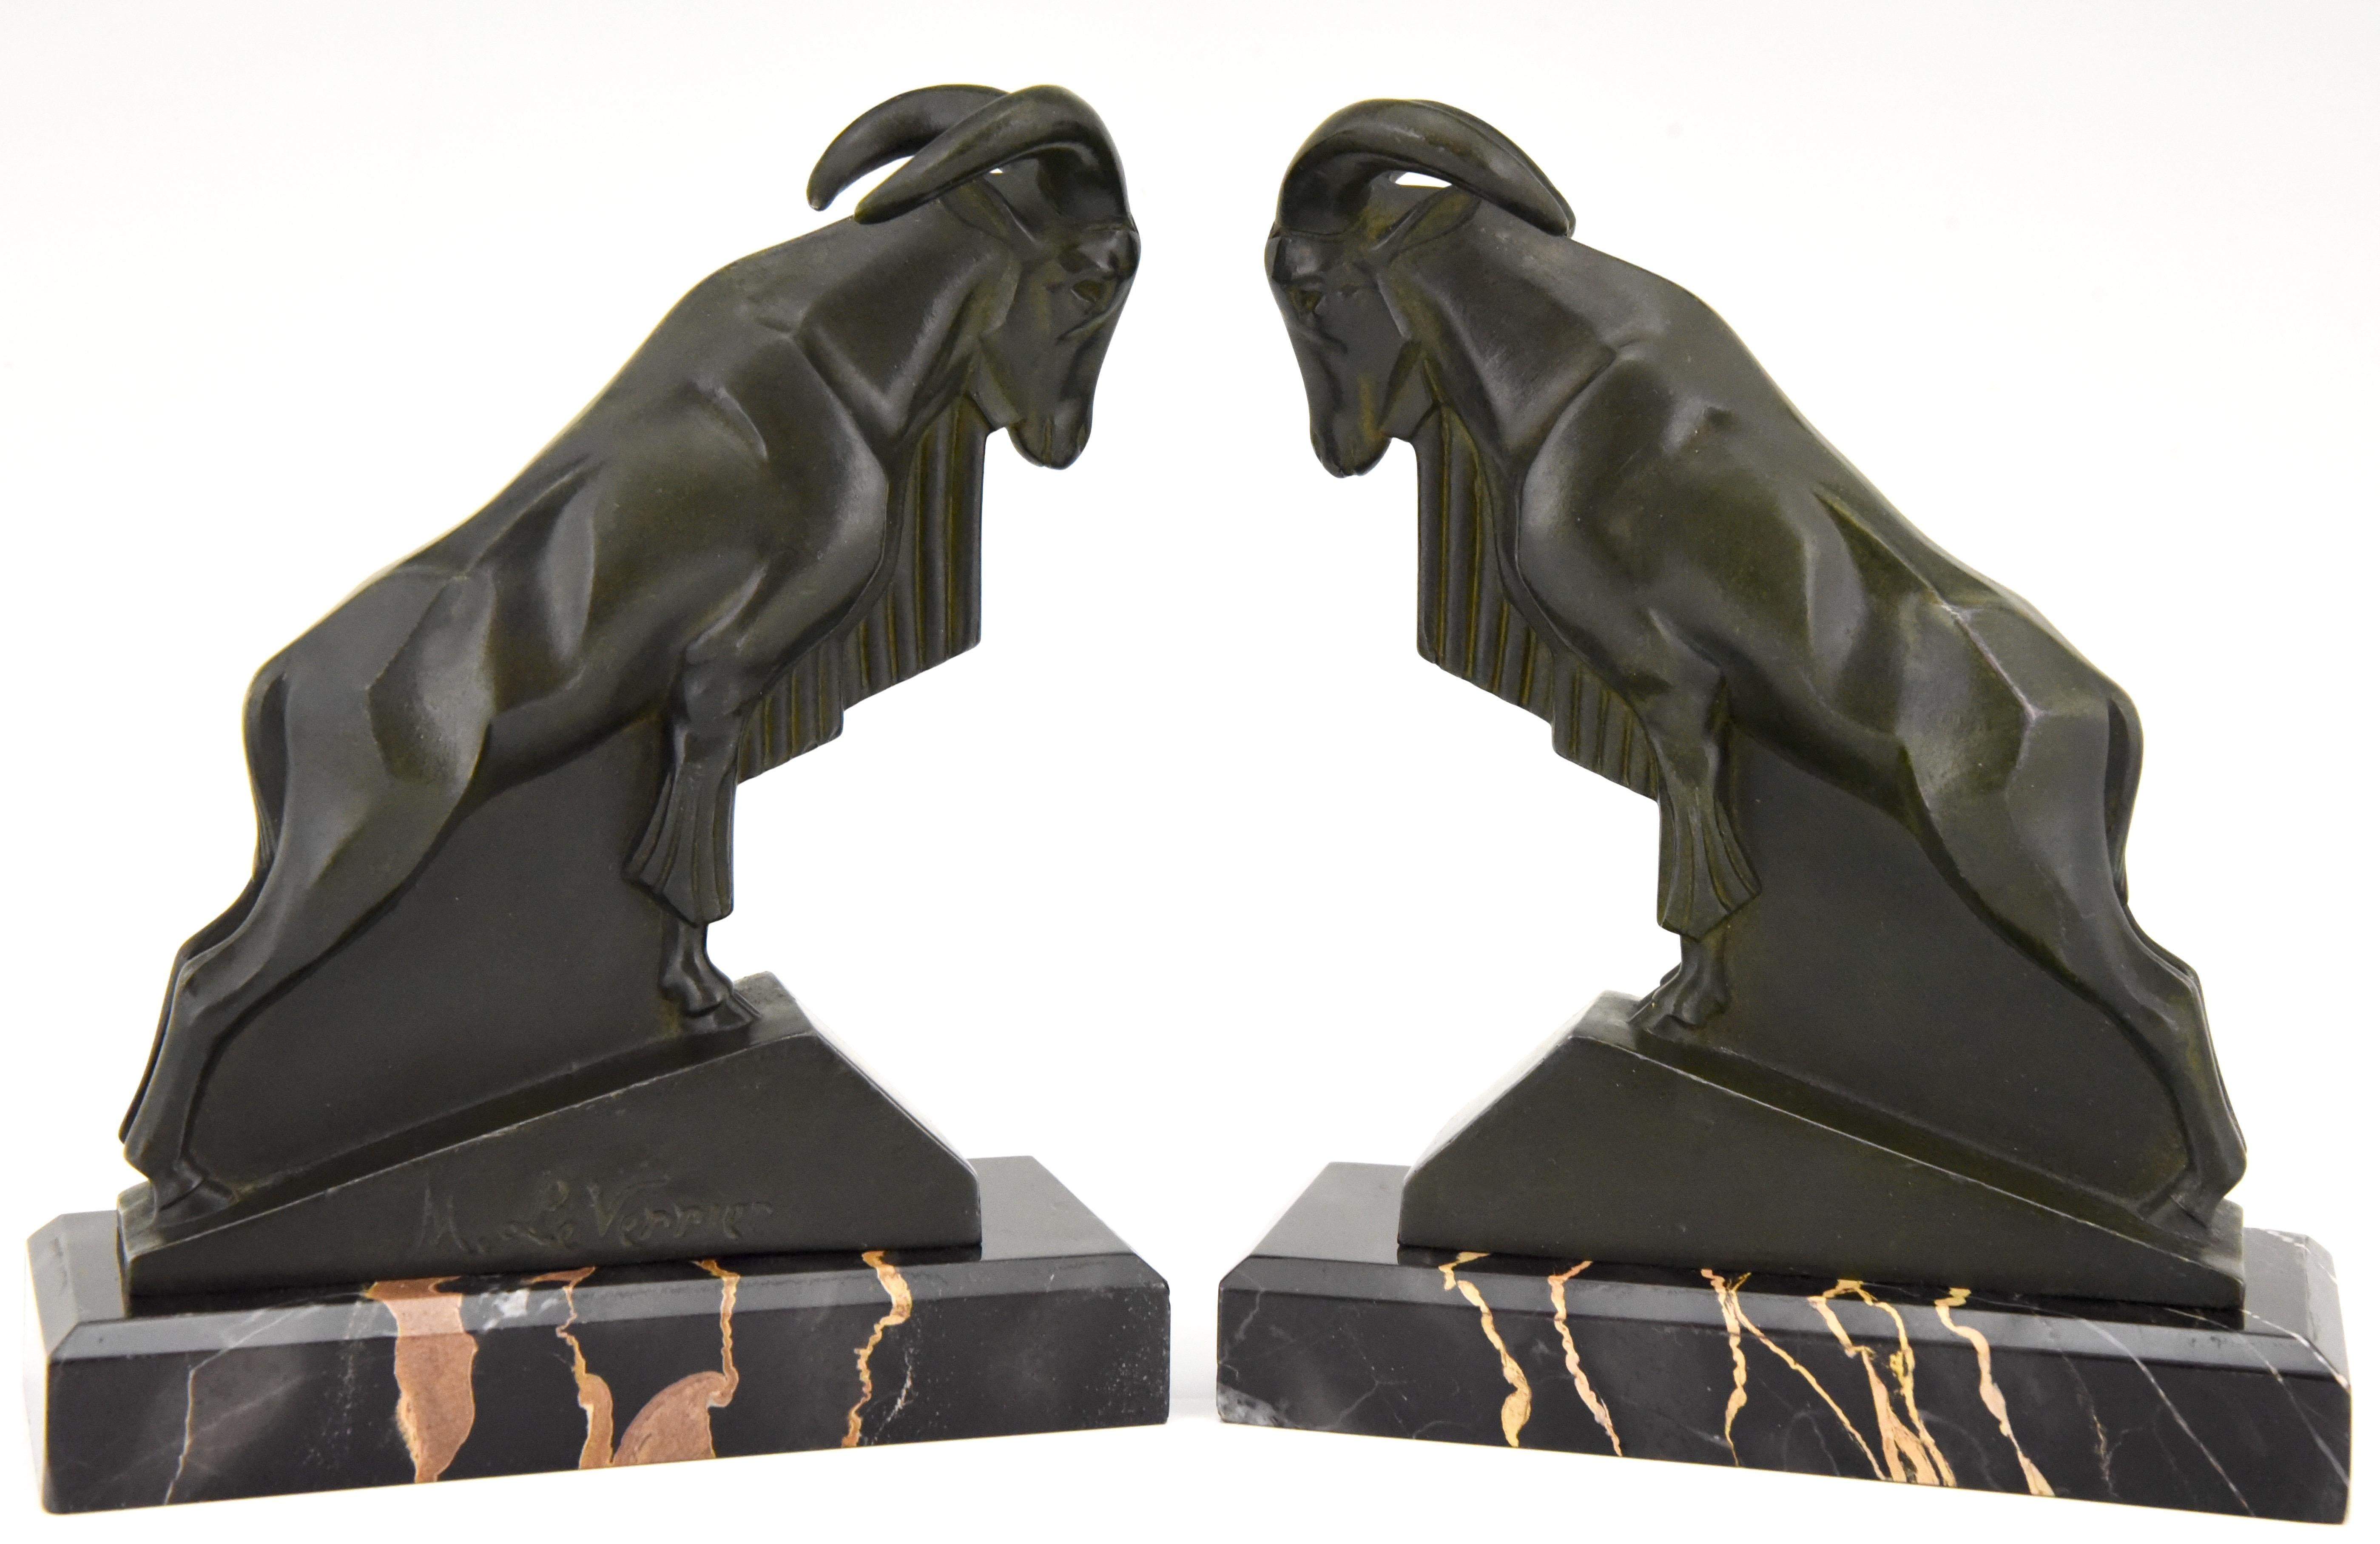 Stylish Art Deco Ibex or Ram bookends, signed by the well know sculptor Max Le Verrier with lovely green patina. The bookends are mounted on portor marble bases, France, 1930.
They were a birthday gift: Written text and date 13-5-1928.
“Happy